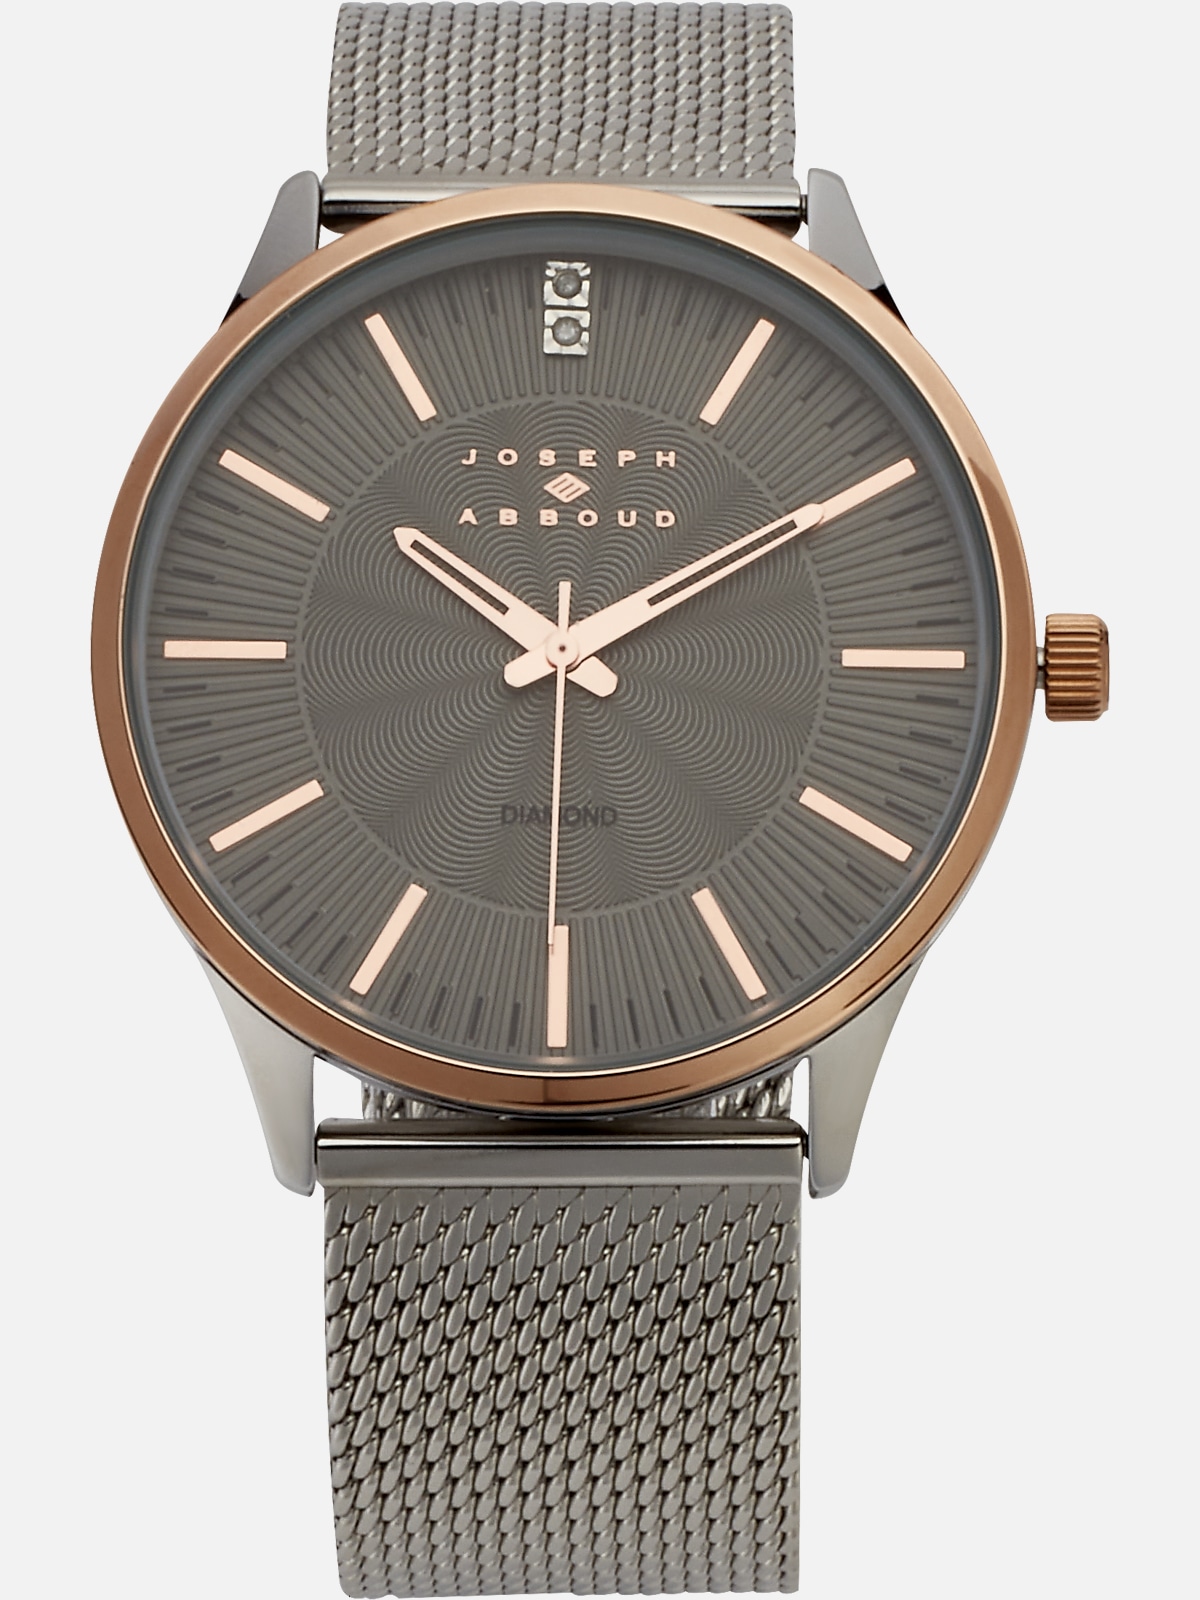 Joseph Abboud Silver-Tone Mesh Band Watch | All Clearance $39.99| Men's ...